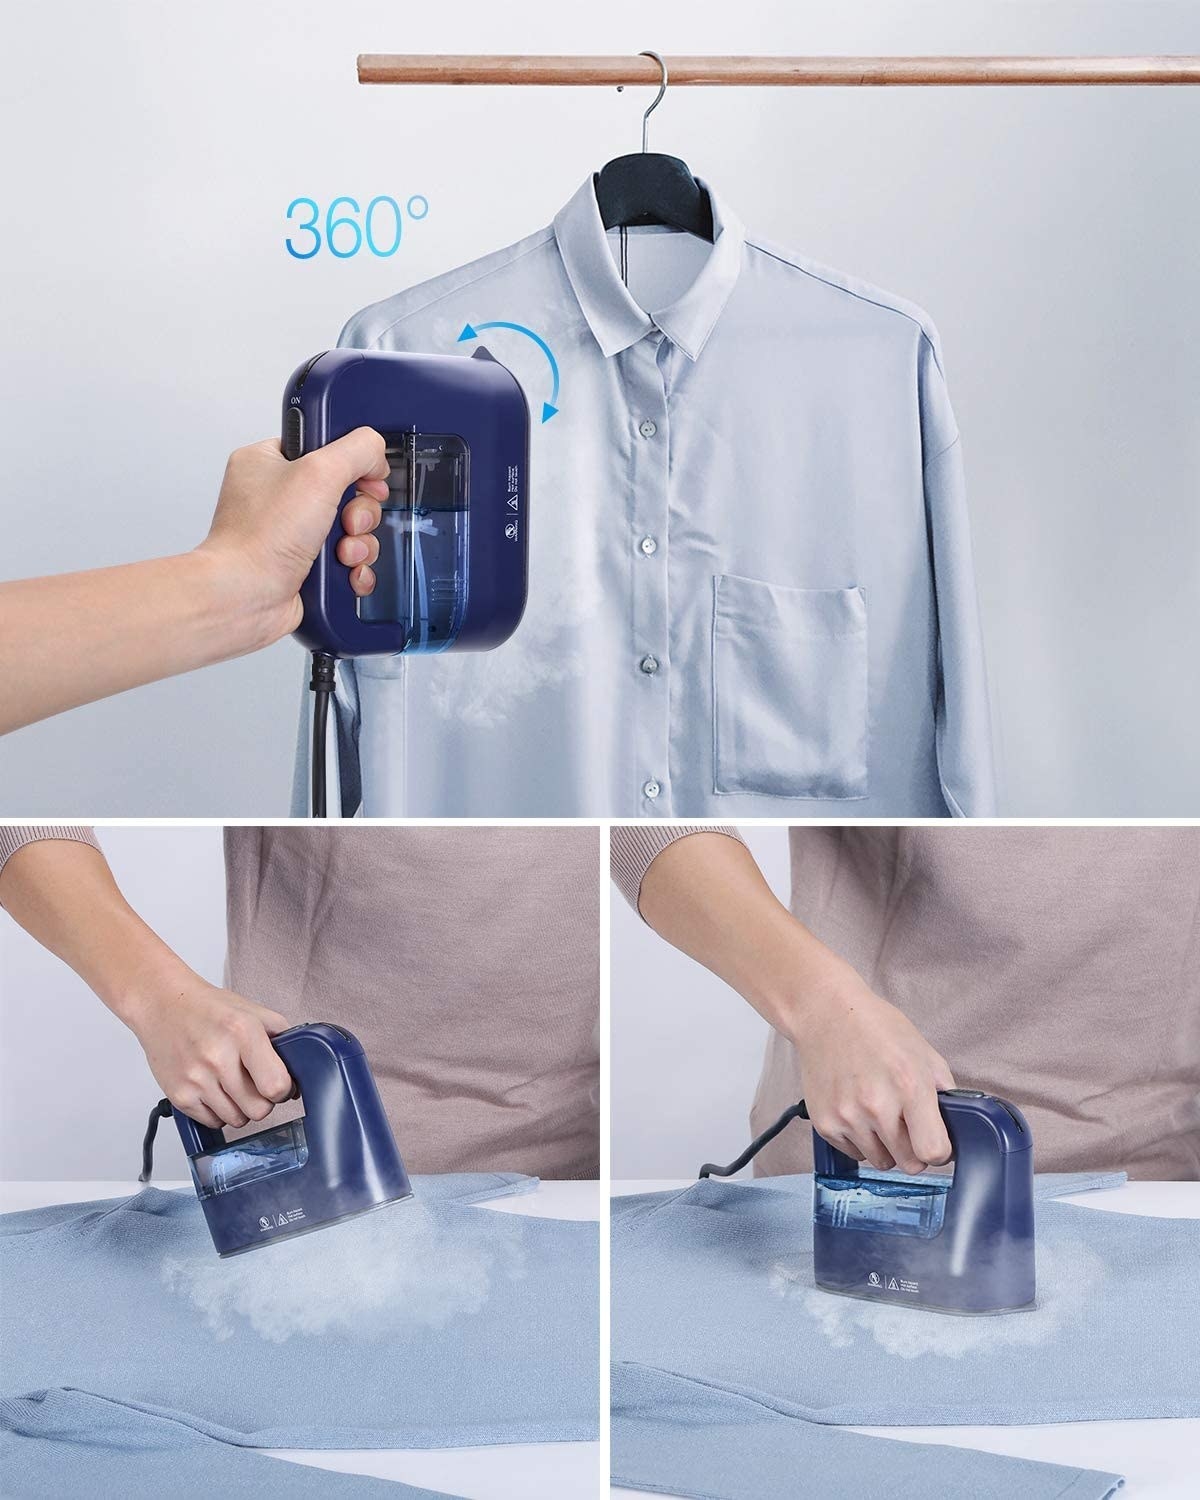 A person steaming and ironing shirts with the device